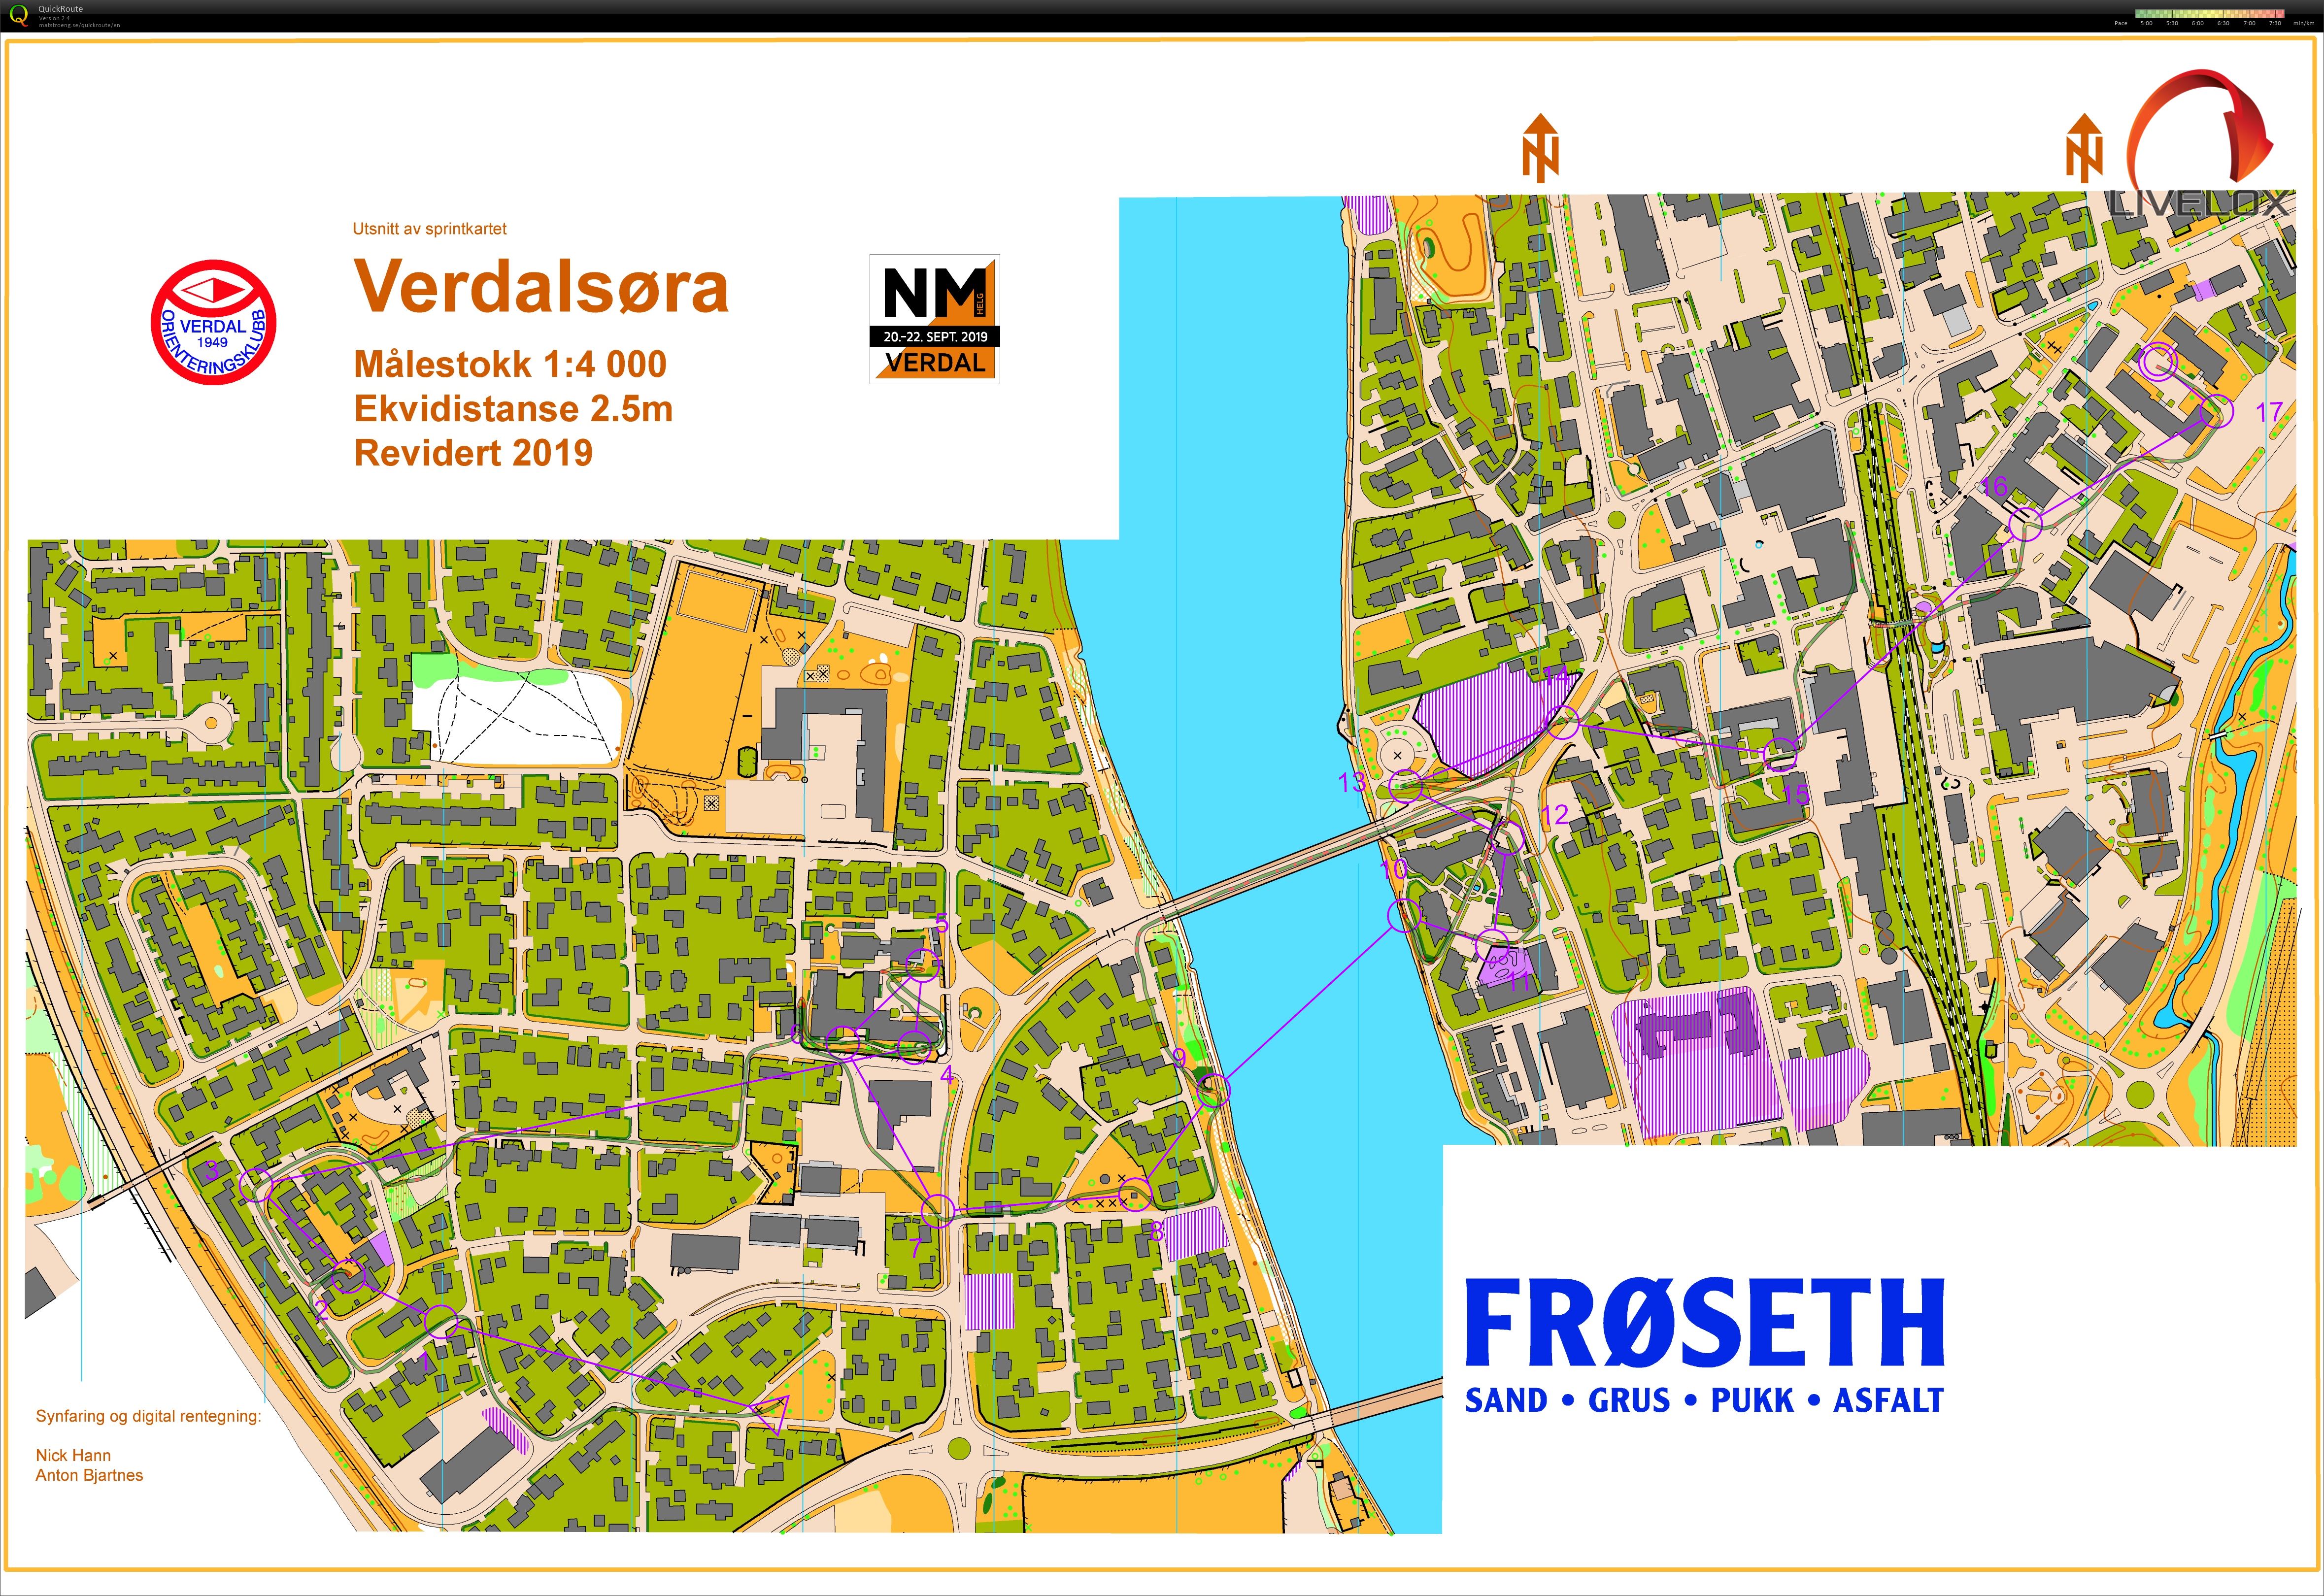 Norgescup sprint (20/09/2019)